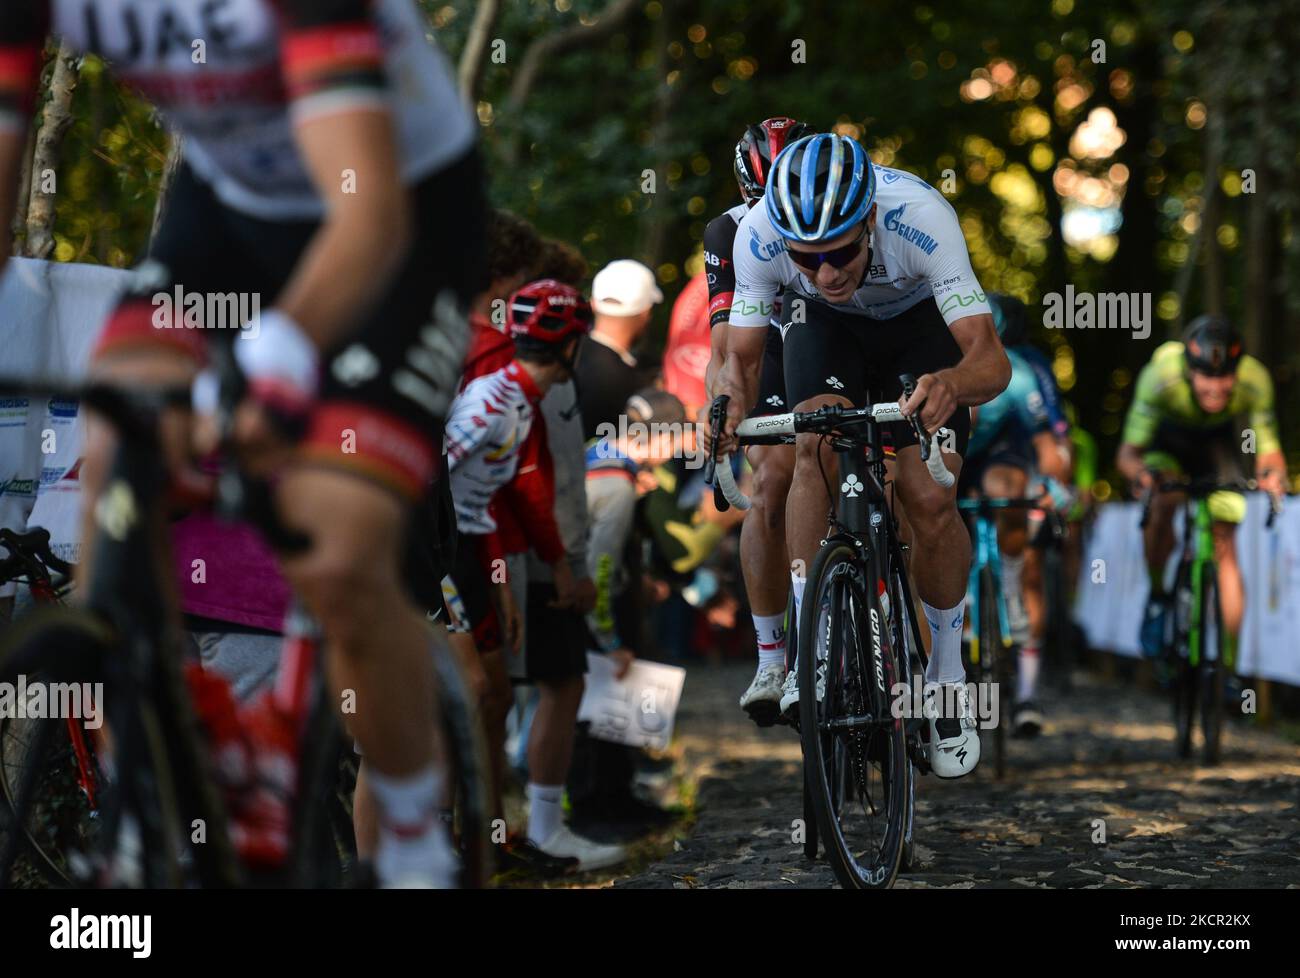 Riders in action at the Muro della Tisa, a cycling climb located in the Province of Vicenza, during the first edition of the Veneto Classic, the 207km pro cycling race from Venezia to Bassano del Grappa, held in the Veneto region. On SUnday, October 17, 2021, in Bassano del Grappa, Veneto, Italy. (Photo by Artur Widak/NurPhoto) Stock Photo